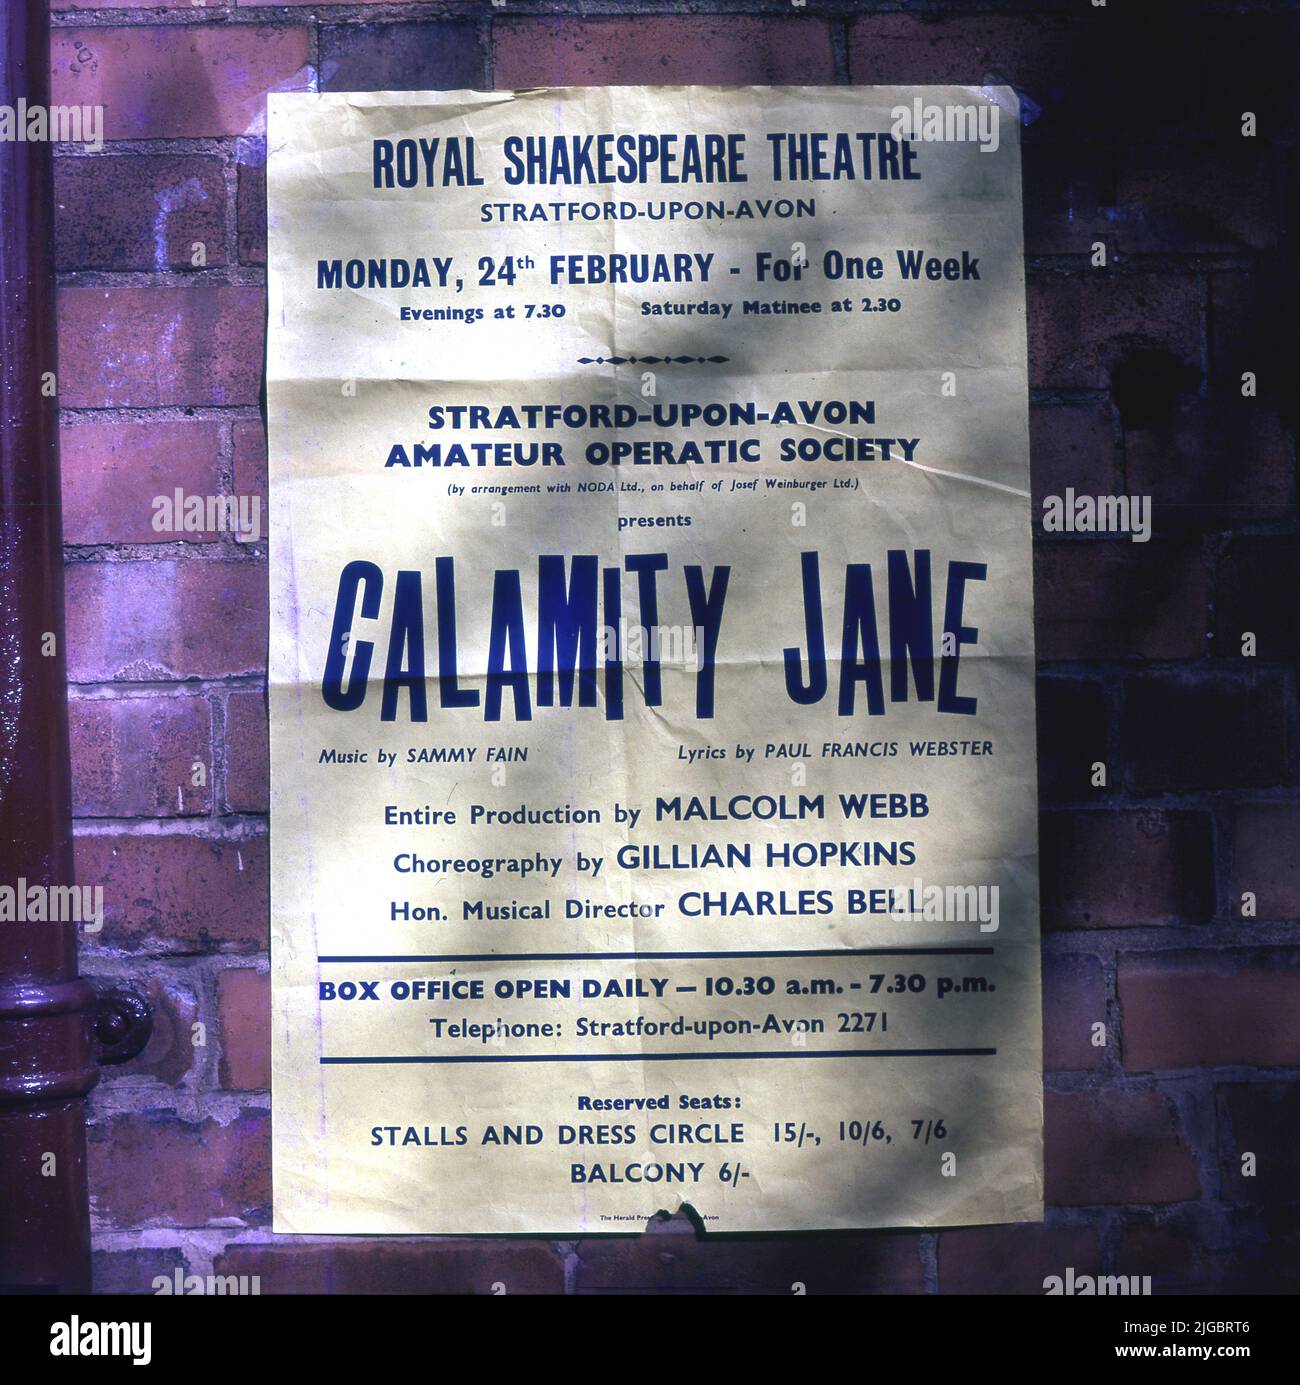 1969, on external brickwall, a poster advertising a Stratford -Upon-Avon Amateur Operatic Society production of 'Calamity Jane' at the Royal Shakespeare Theatre, Stratford-Upon, England, UK. Calamity Jane was a musical western stage play based on the successful 1953 film featuring Doris Day and Howard Keel, telling the adventures of a bawdy American heroine. Founded in 1921, the Stratford-upon-Avon Amateur Operatic Society's first production was The Mikado at the Old Shakespeare Memorial Theatre in 1922. The society was renamed as the Stratford Musical Theatre Company in 2010 Stock Photo